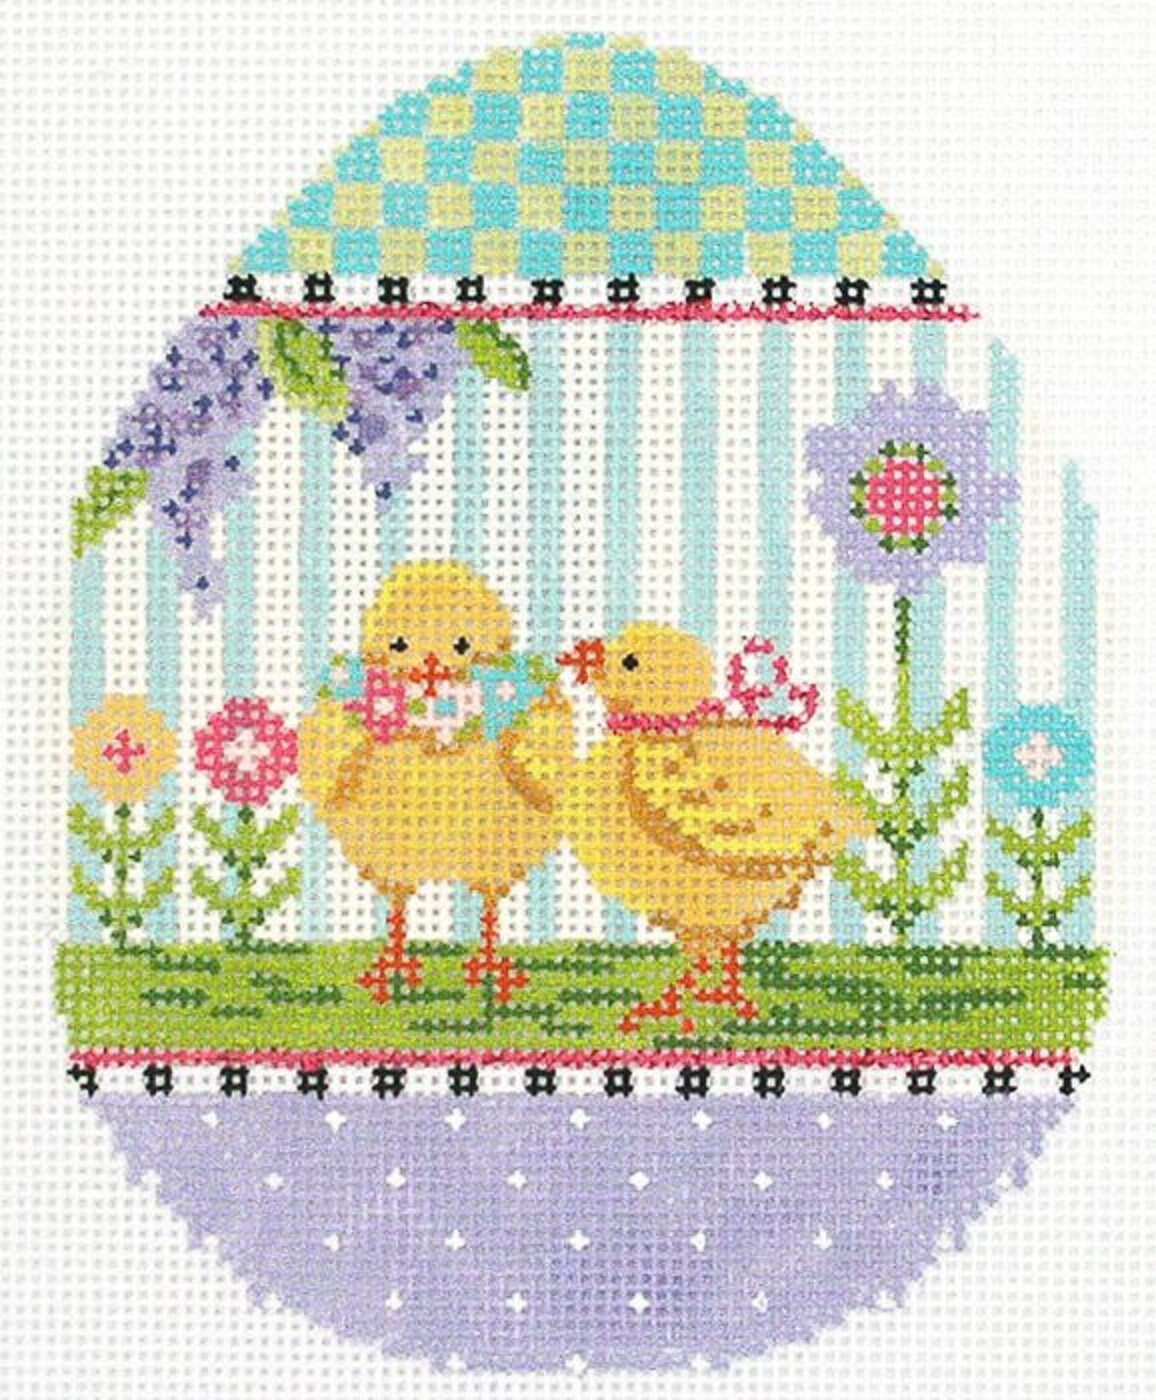 Needlepoint Handpainted Kelly Clark Easter Egg Pair O Chicks 4x5 -Free Us Shipping